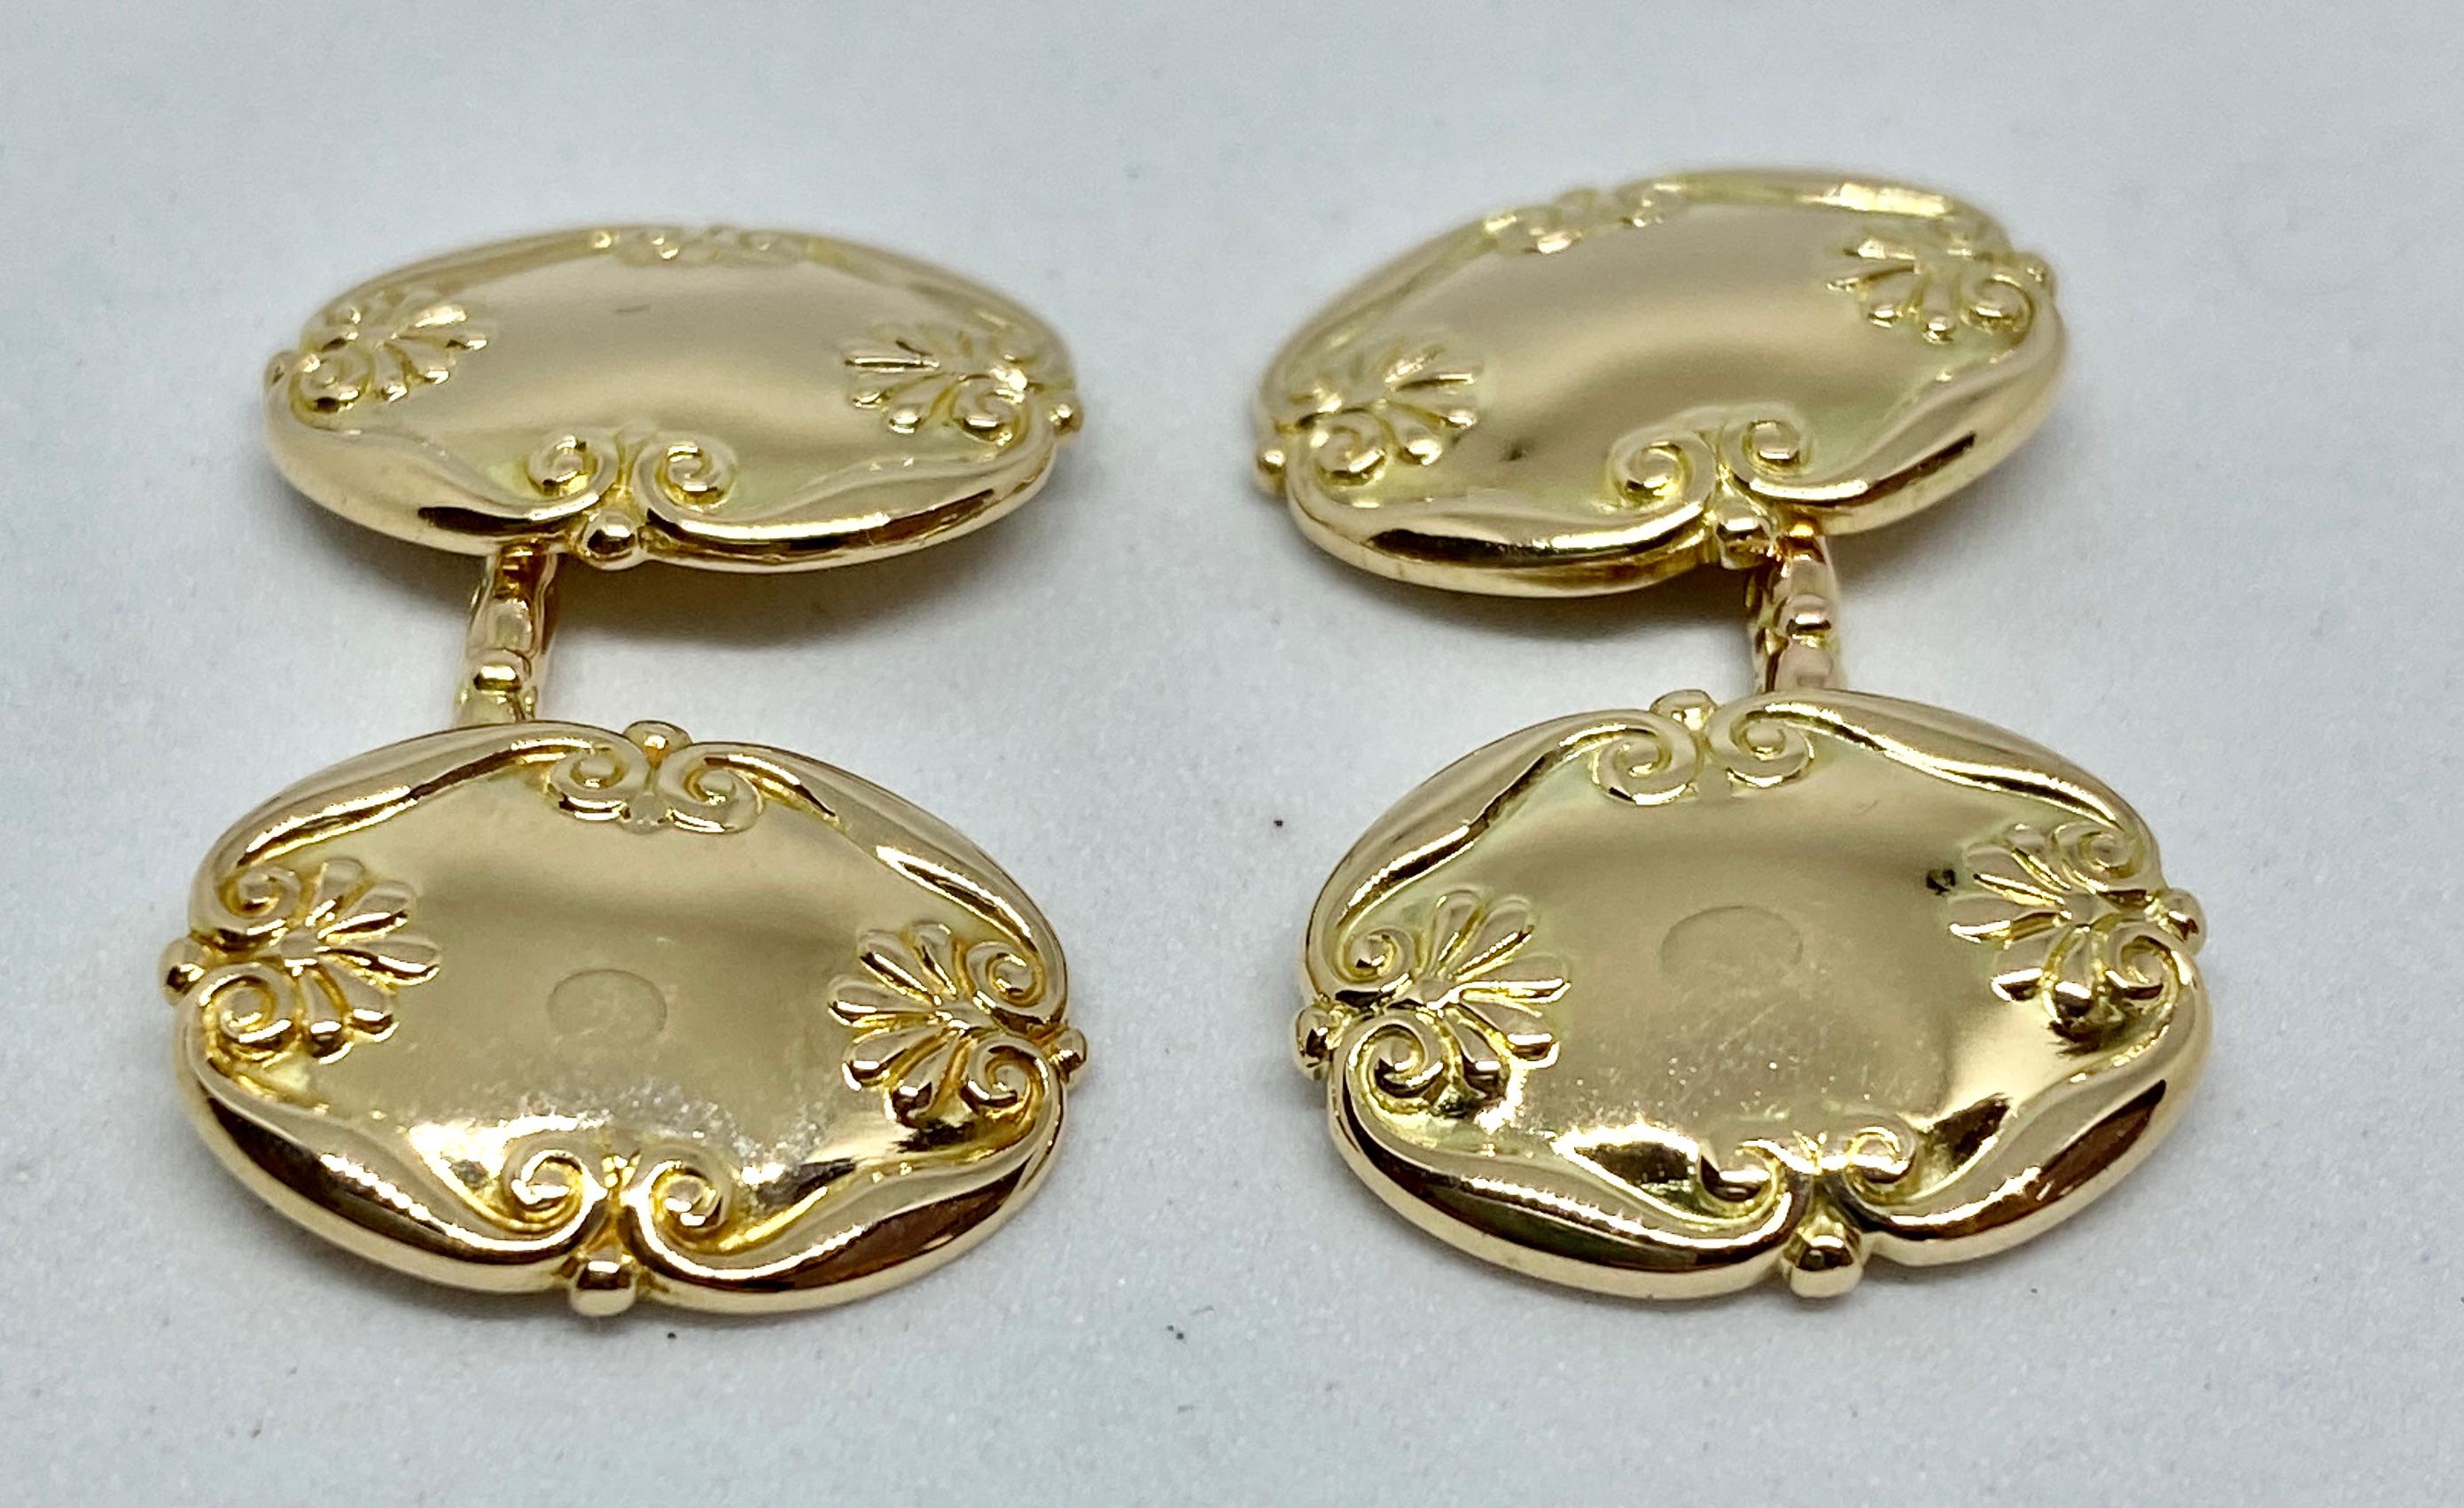 Art Nouveau Cufflinks in Yellow Gold by Marcus & Company In Good Condition For Sale In San Rafael, CA